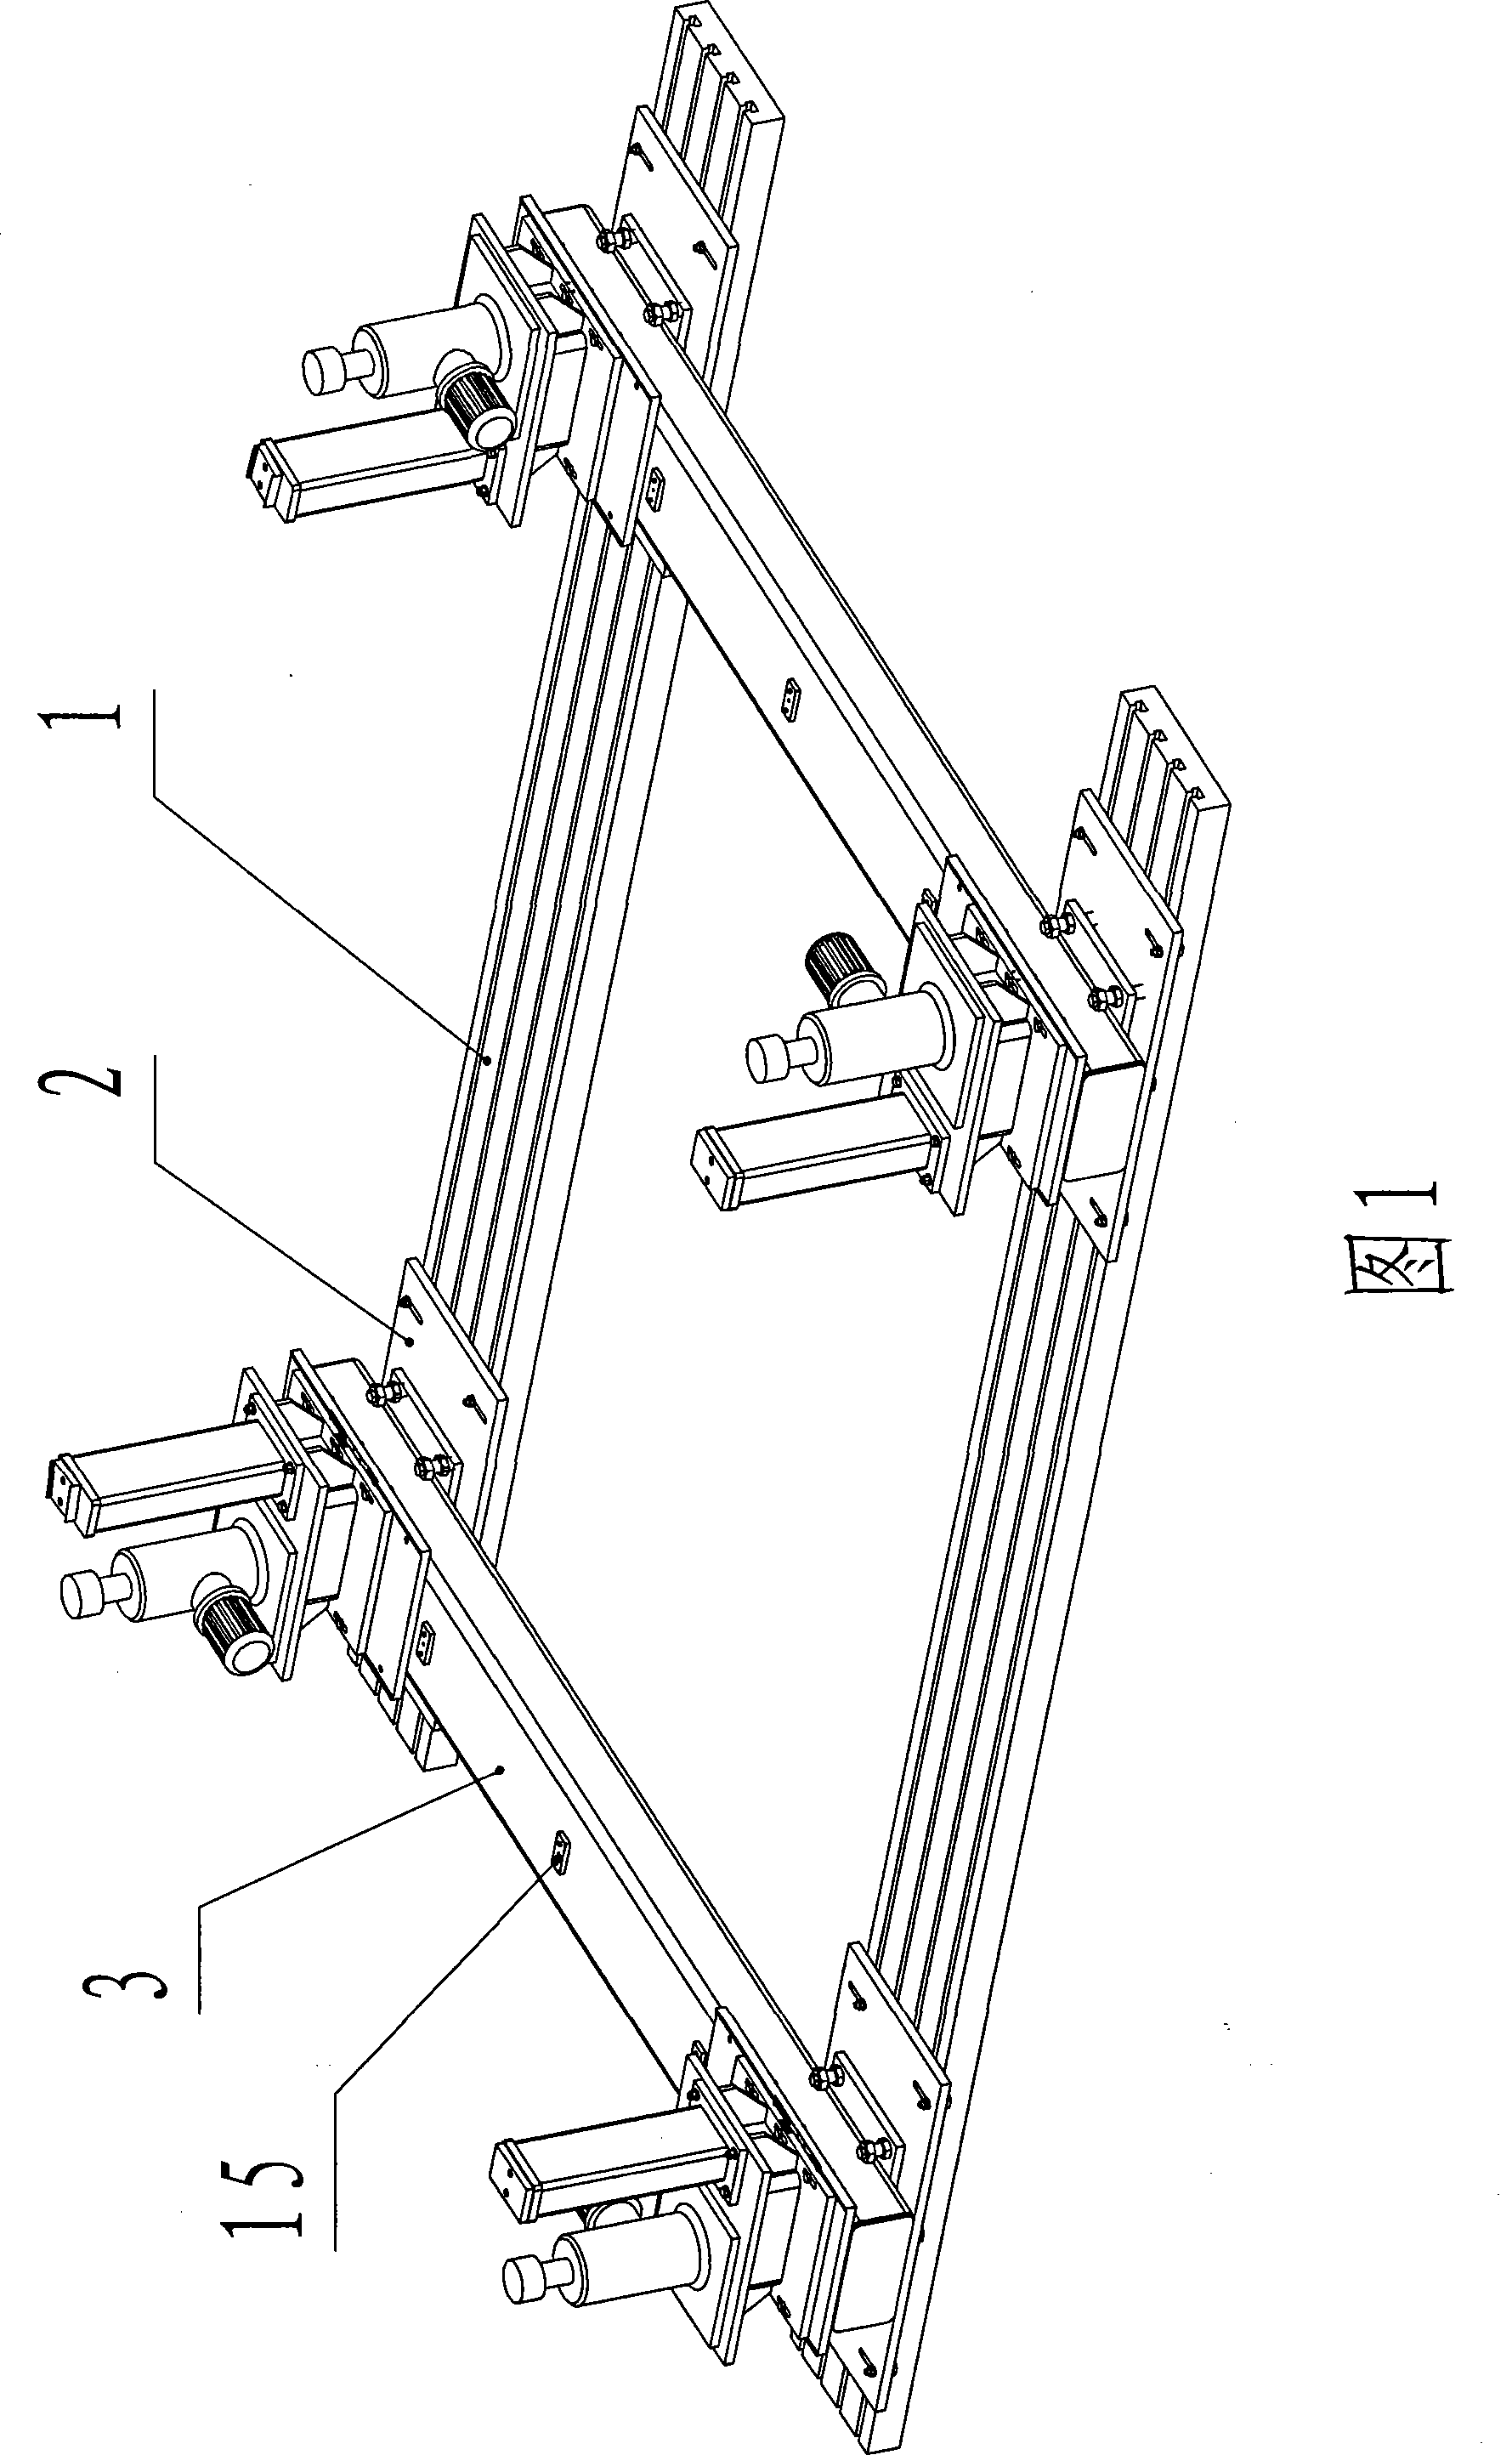 Four-angle weighing apparatus for vehicle